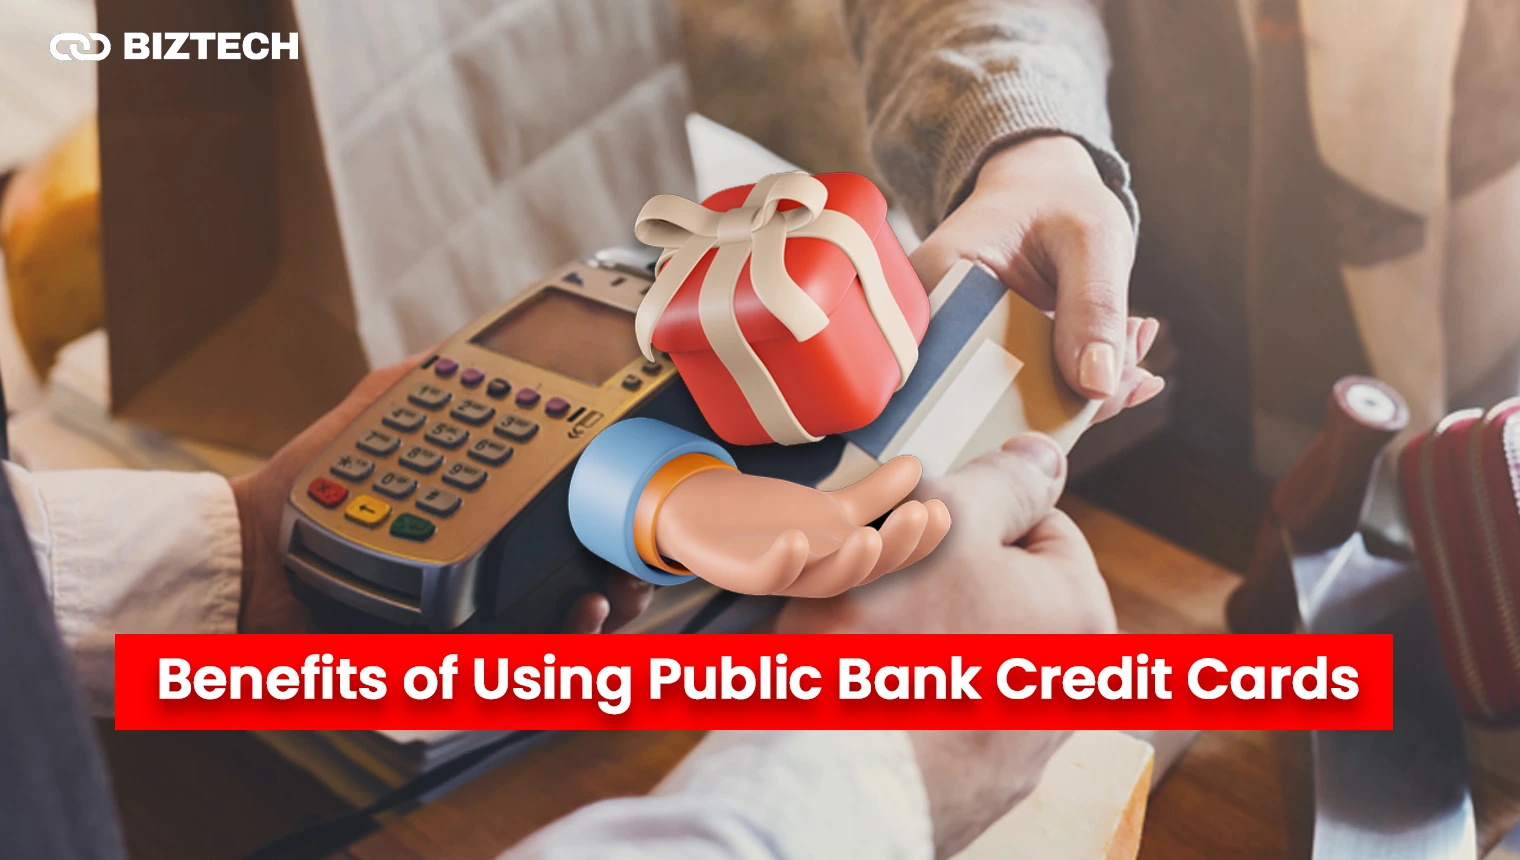 Benefits of Using Public Bank Credit Cards